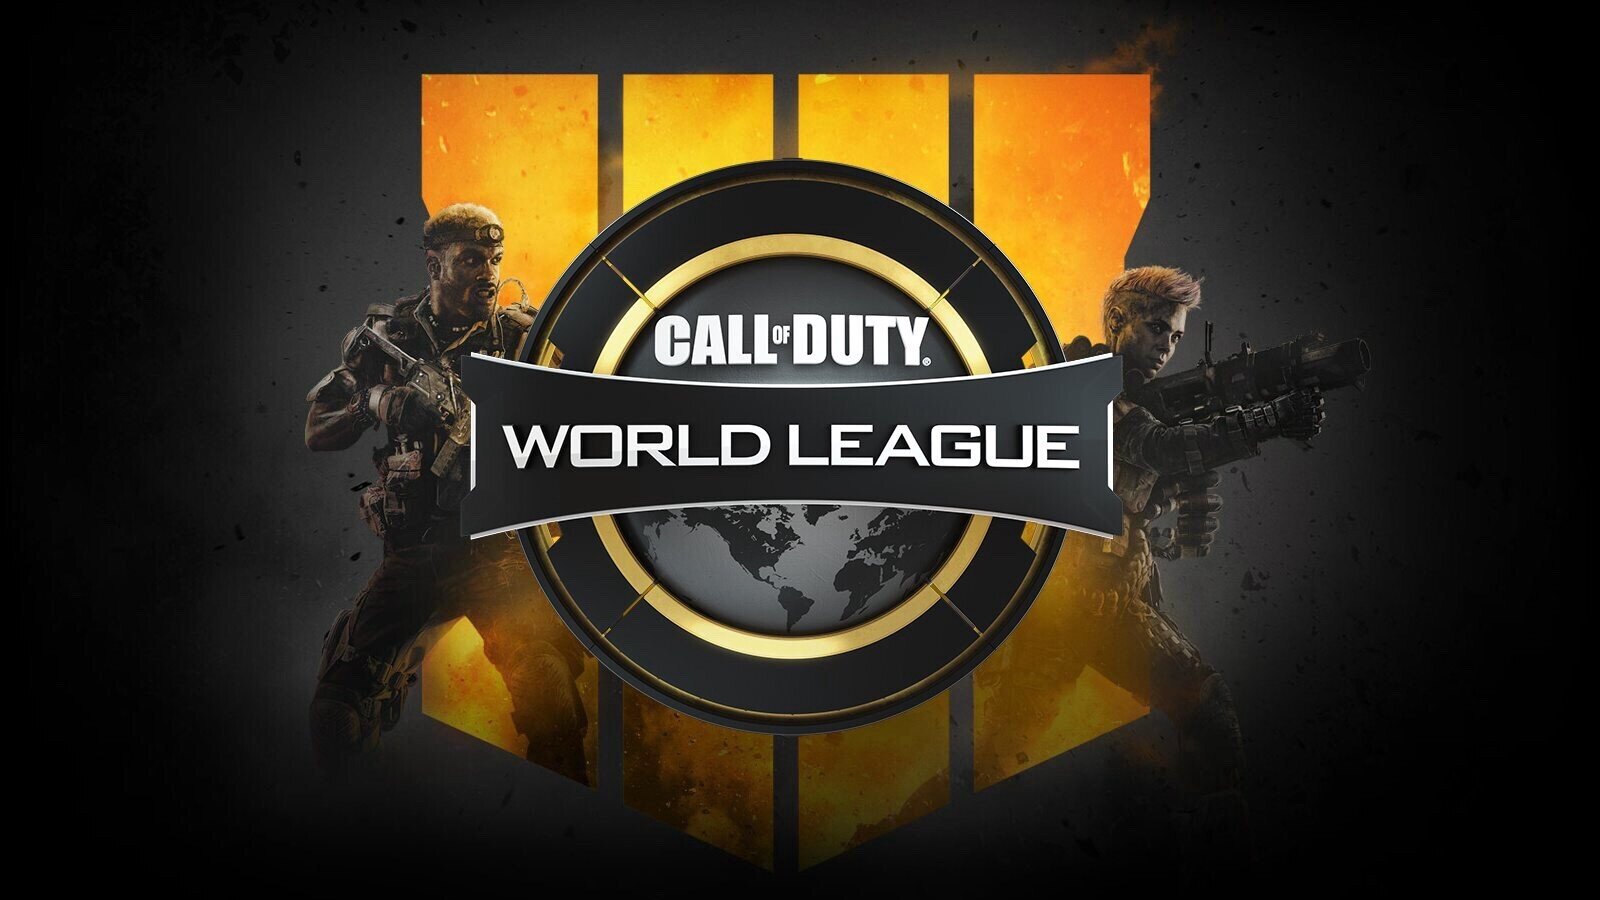 Less then three weeks before CWL Las Vegas, Treyarch and the CWL have decided to alter the rules for the upcoming season.